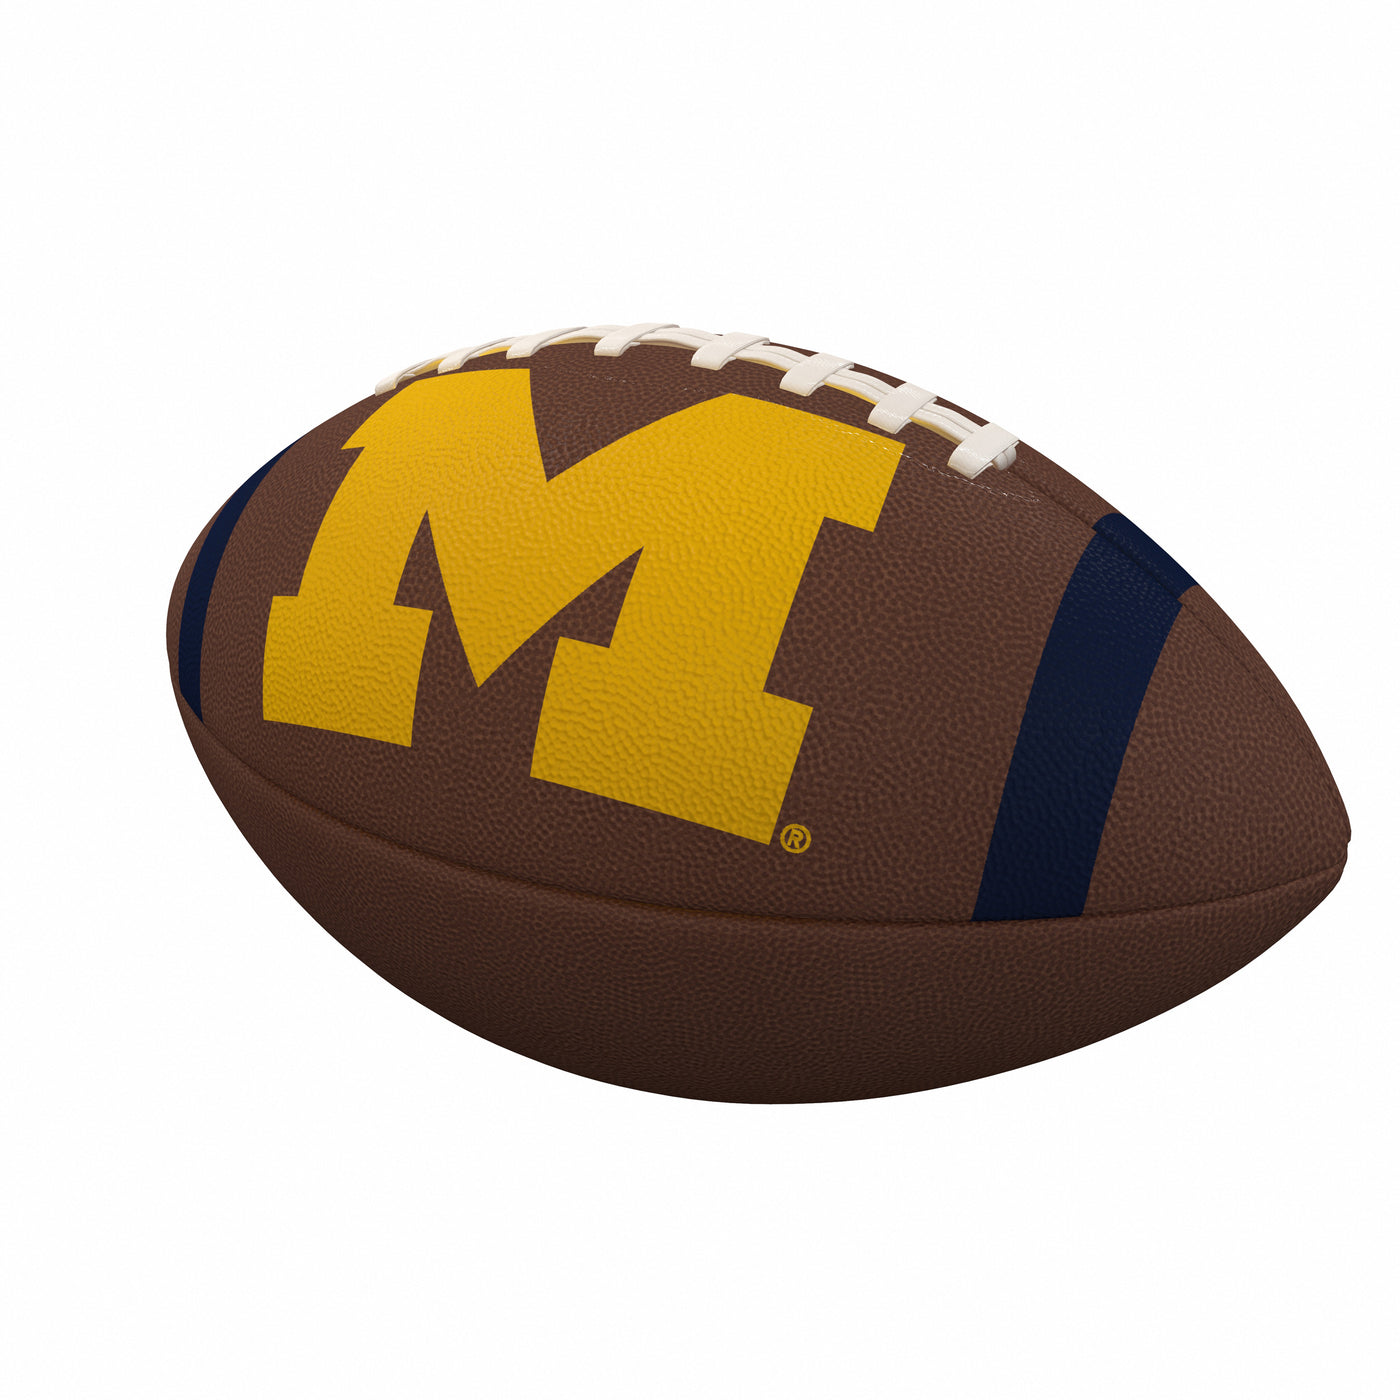 Michigan Team Stripe Official-Size Composite Football